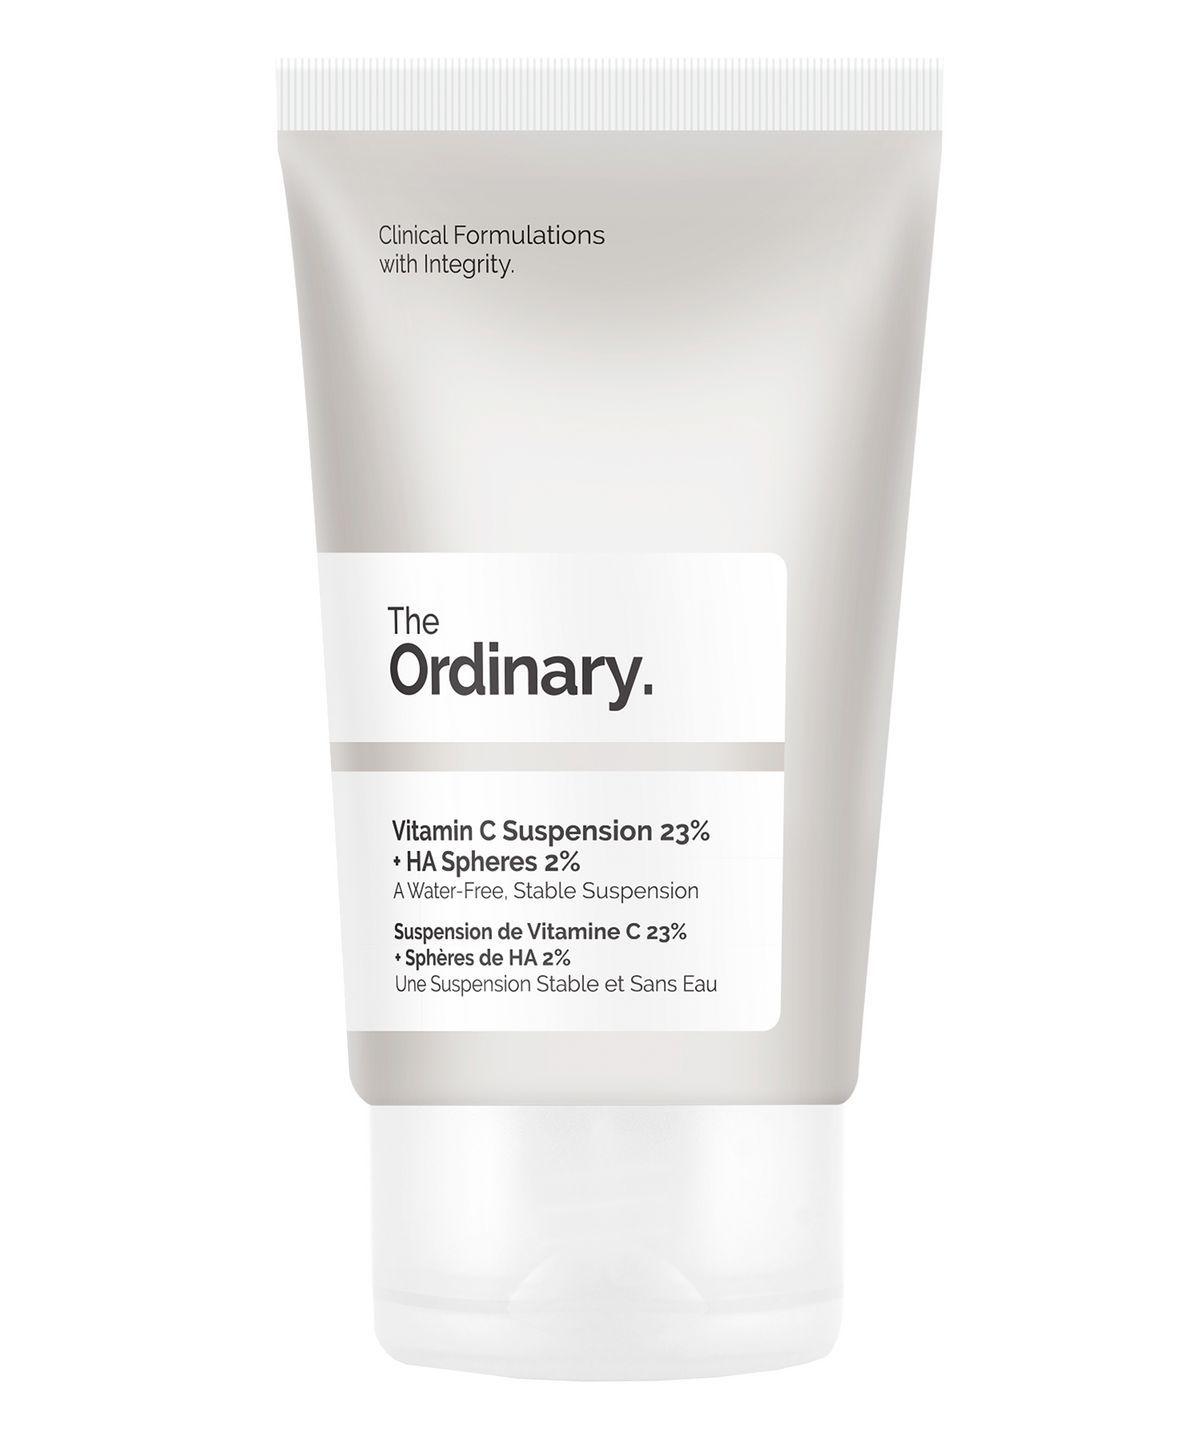 Vitamin C Suspension 23% + HA Spheres 2% by The Ordinary in UAE at Shopey.ae